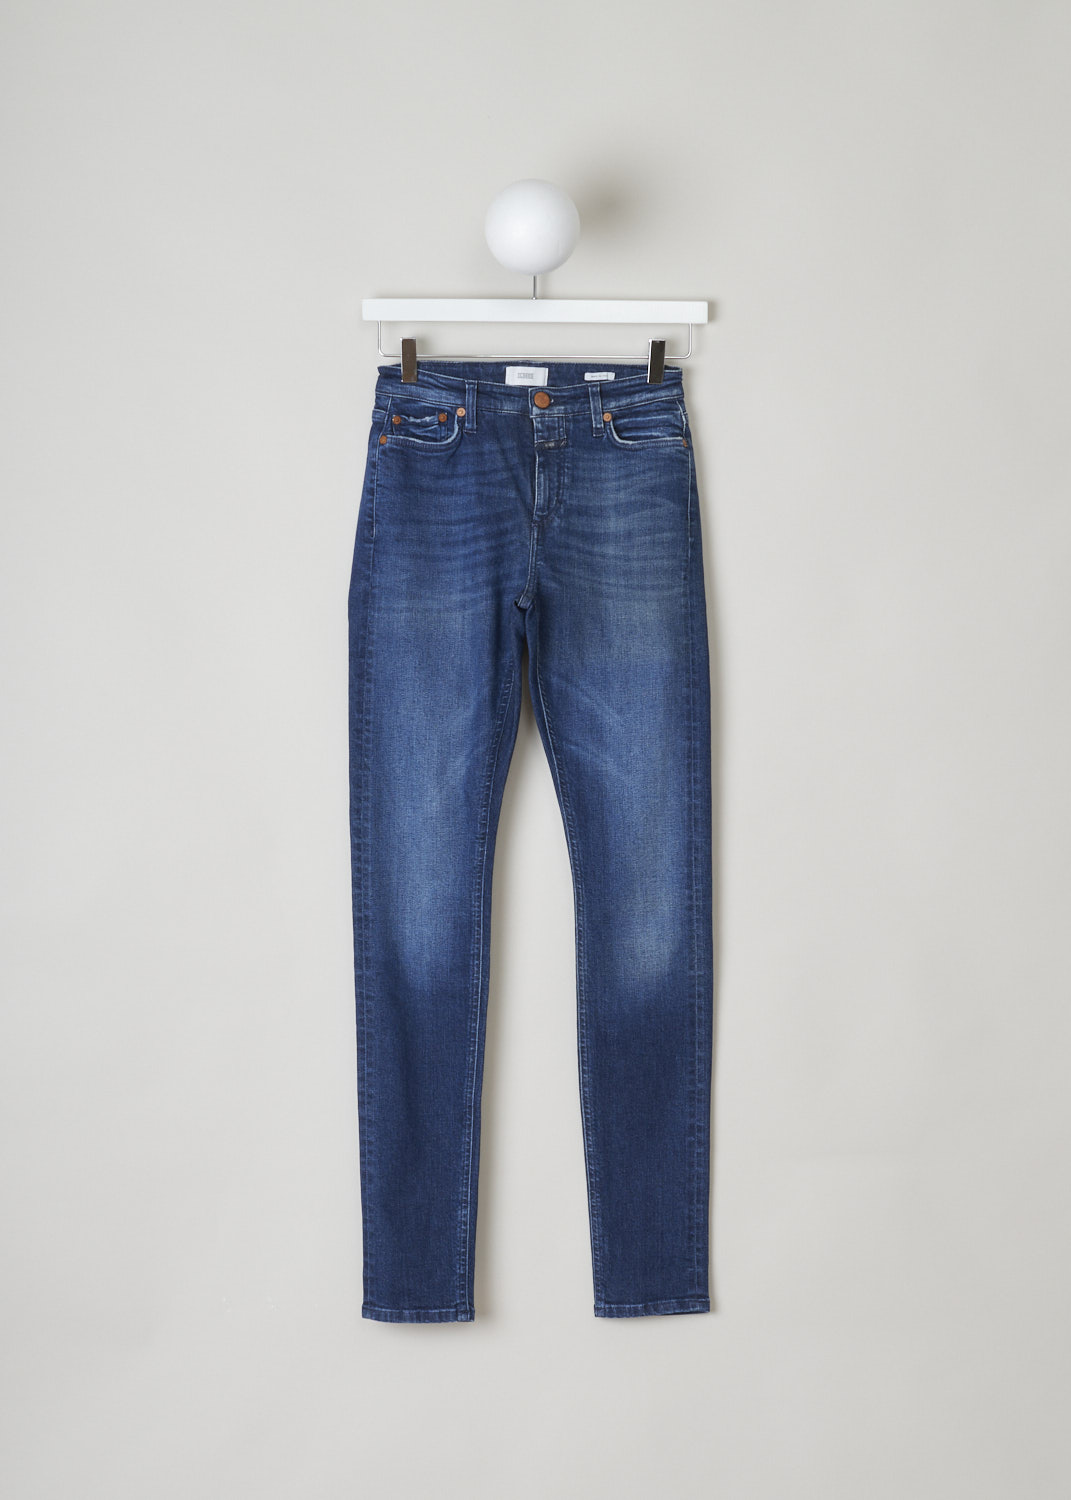 Closed, Mid-blue skinny high-waist lizzy jeans, lizzy_closed_C91099_006_6M_6M, blue, front, Mid-blue 5-pocket jeans comes in a skinny, and high-waist fit. The cotton blend used for this model is know for its high elasticity.